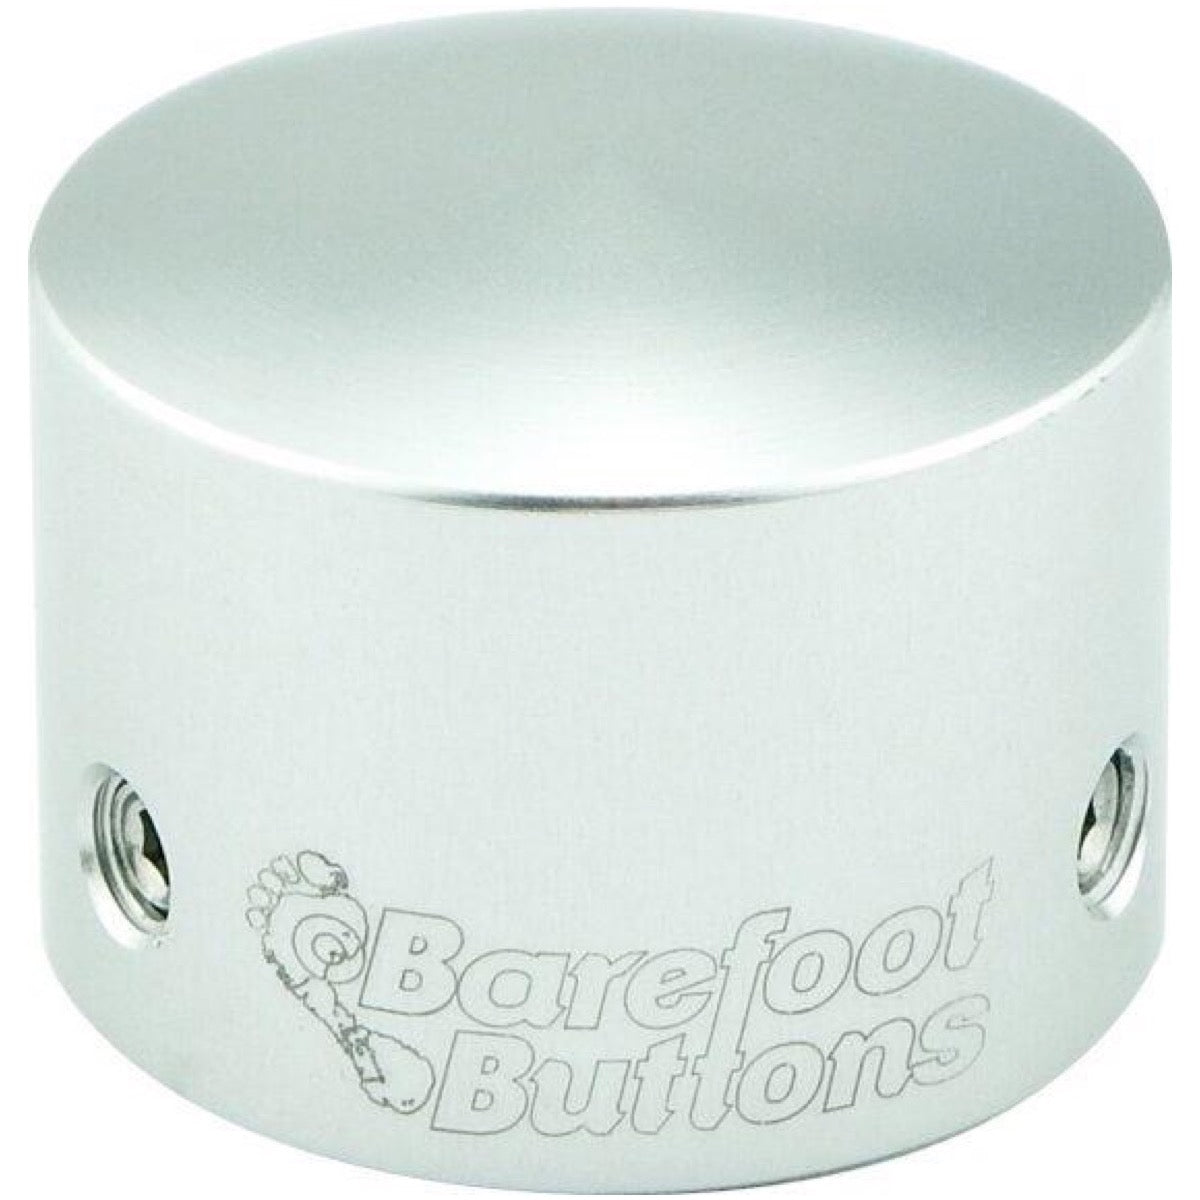 Barefoot Buttons Version 2 Tallboy, Silver